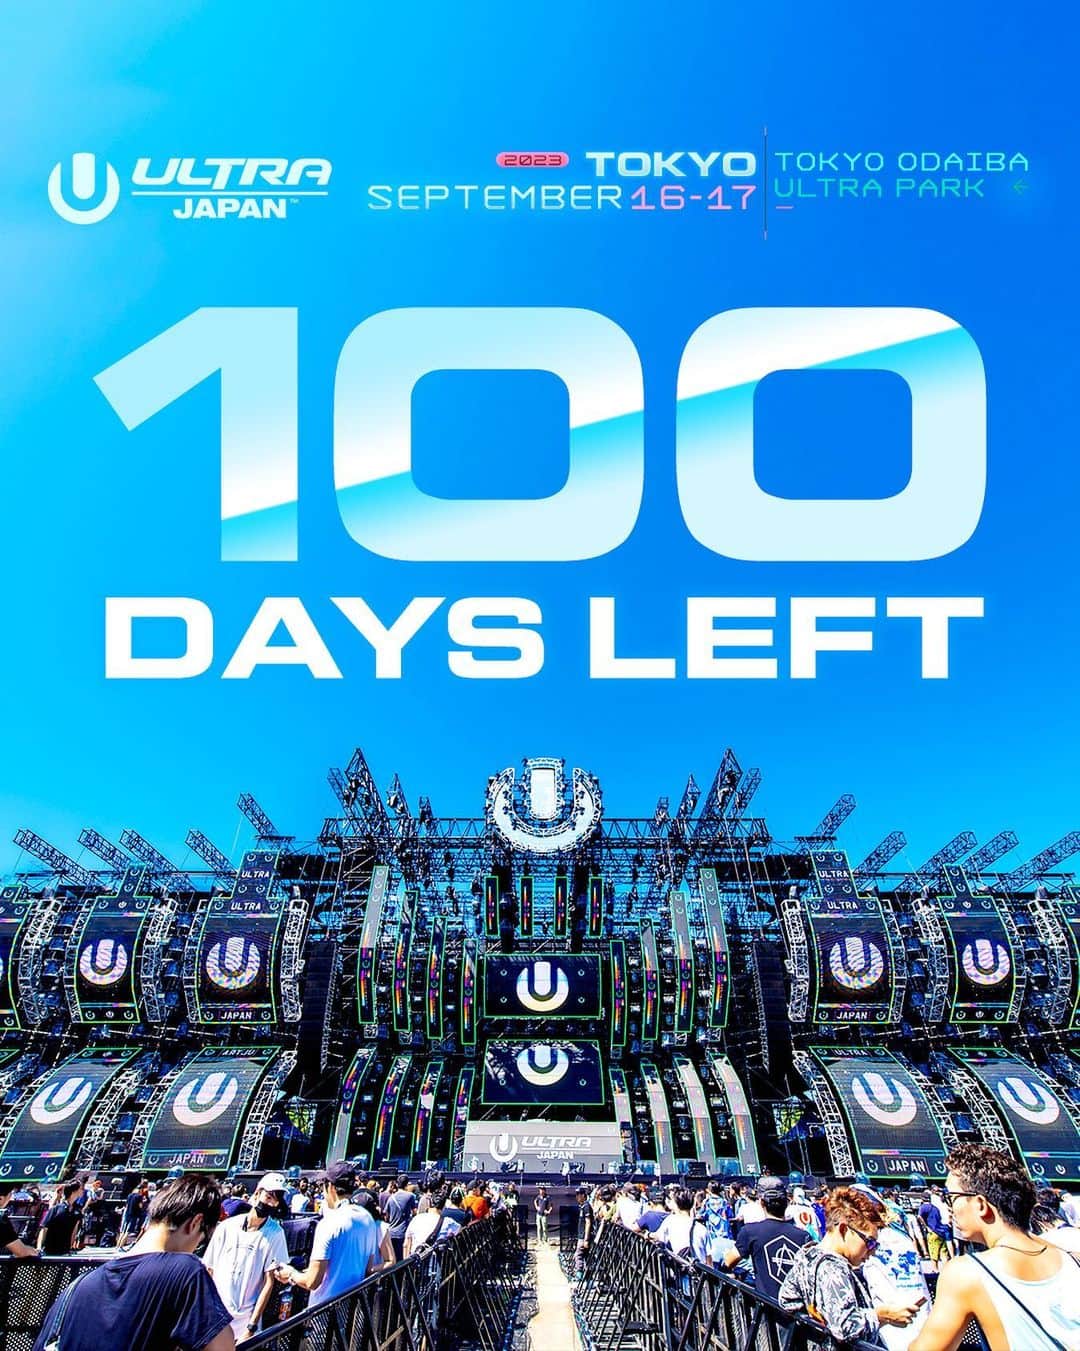 Ultra Japanのインスタグラム：「最高の思い出を作る準備はできていますか？🔥 ULTRA JAPAN 2023開催まで、あと100日！  第1弾最速先着先行チケットをお見逃しなく🔥 チケットはプロフィールリンクから👉@UltraJapan  #ultrajapan #ultrajapan2023 #あと100日 #100days   Are U ready to make the best memories? 🔥 Only 100 days to go until ULTRA JAPAN 2023!  Early Bird Tickets on sale NOW! 👉 @UltraJapan Profile Link」